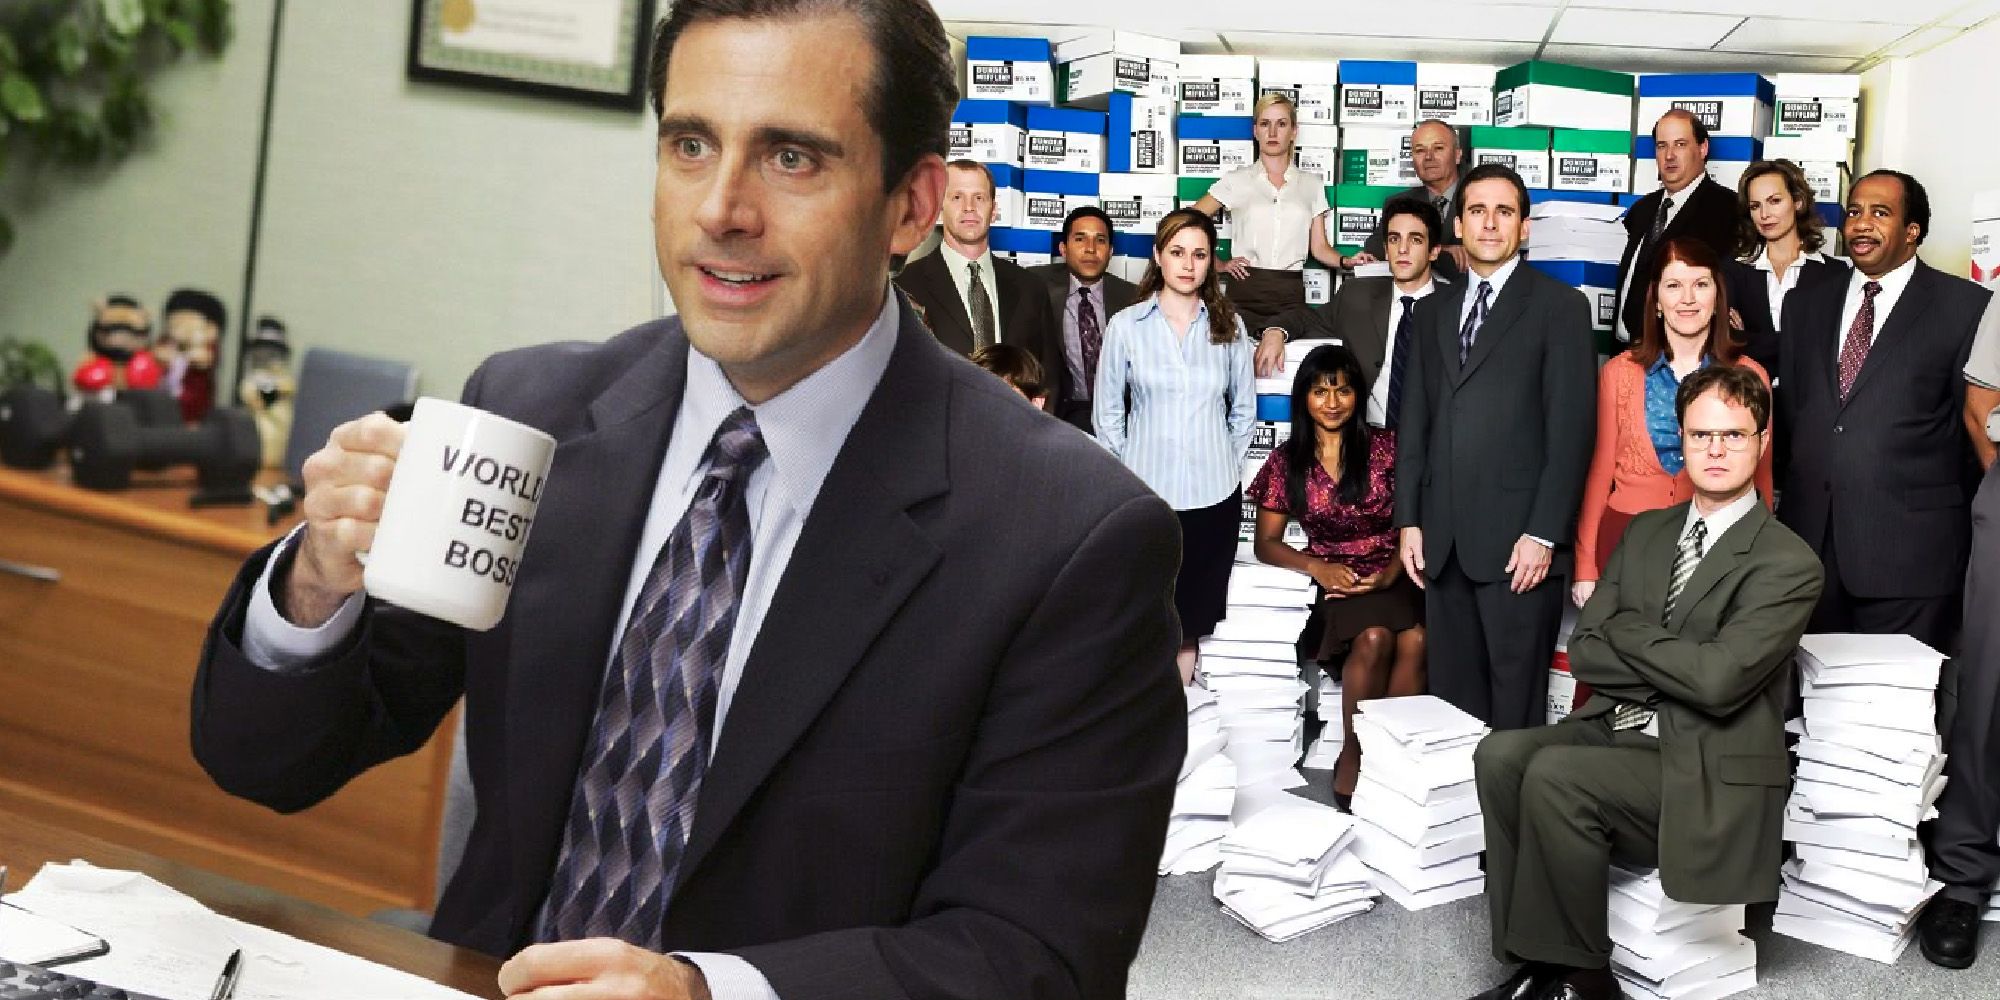 The Office Promotion That Puts You In A Dunder Mifflin Employee's Shoes